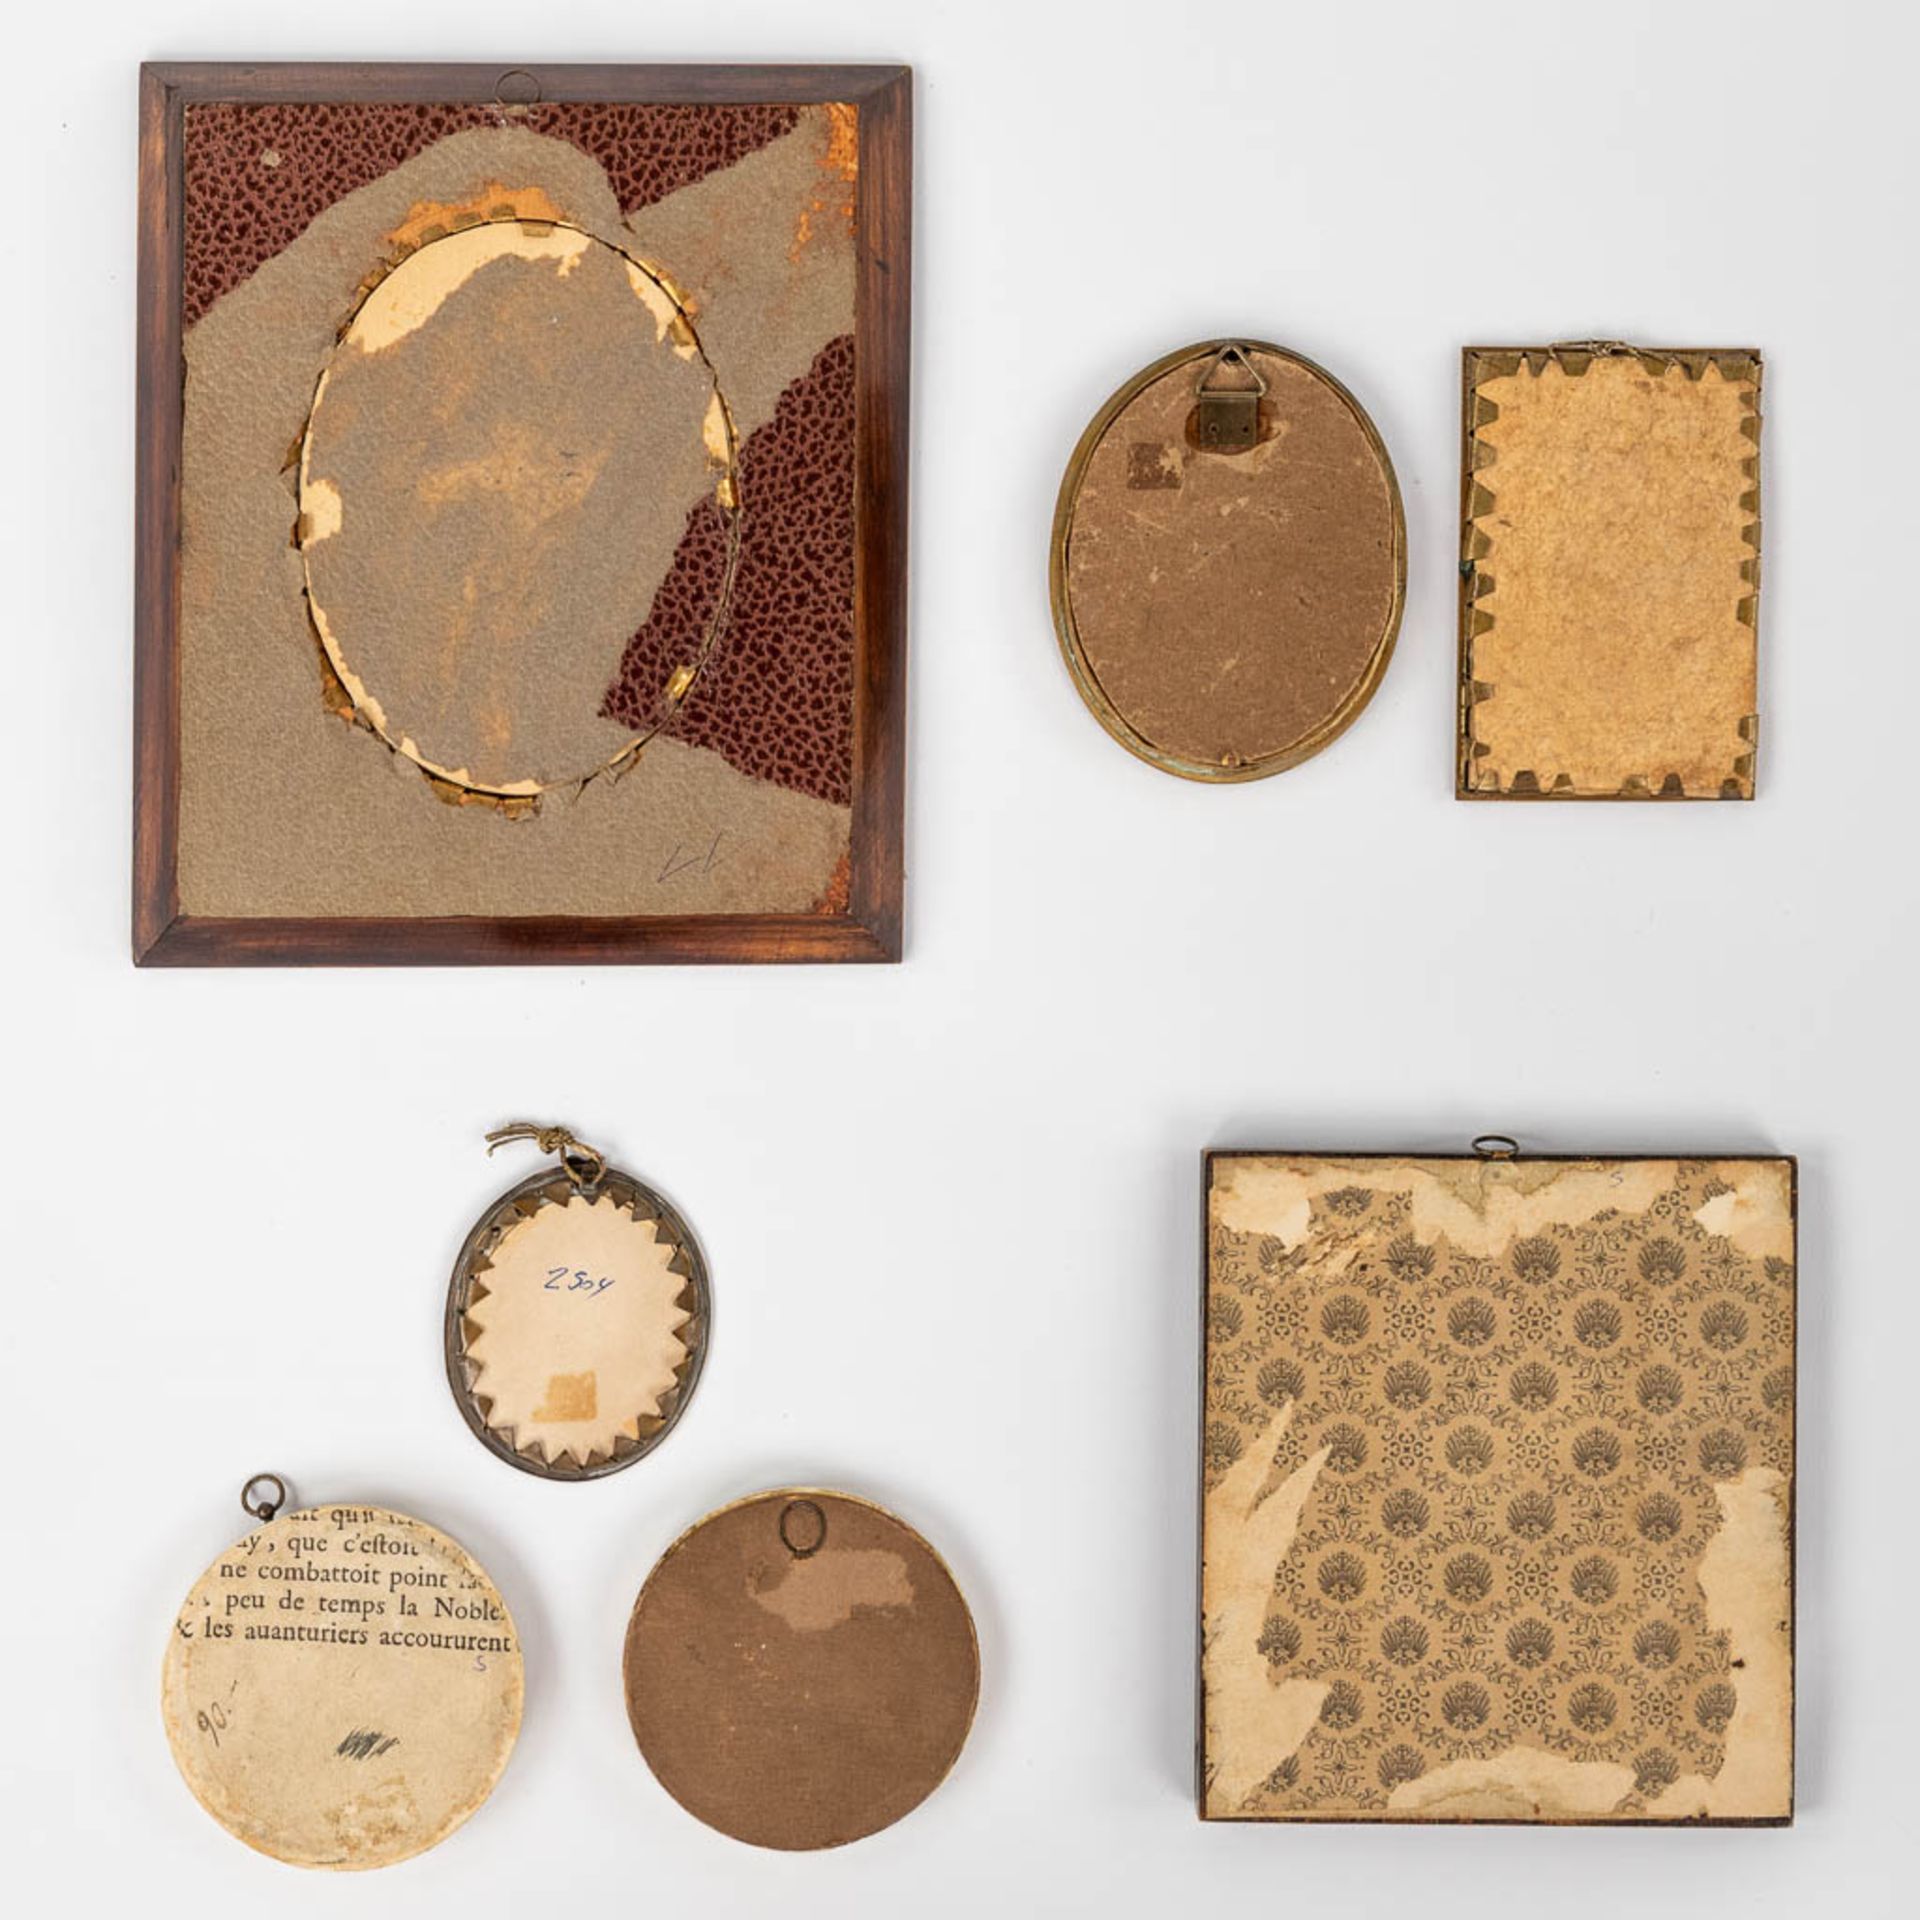 Seven miniature framed paintings, 19th C. (W:17 x H:20 cm) - Image 3 of 13